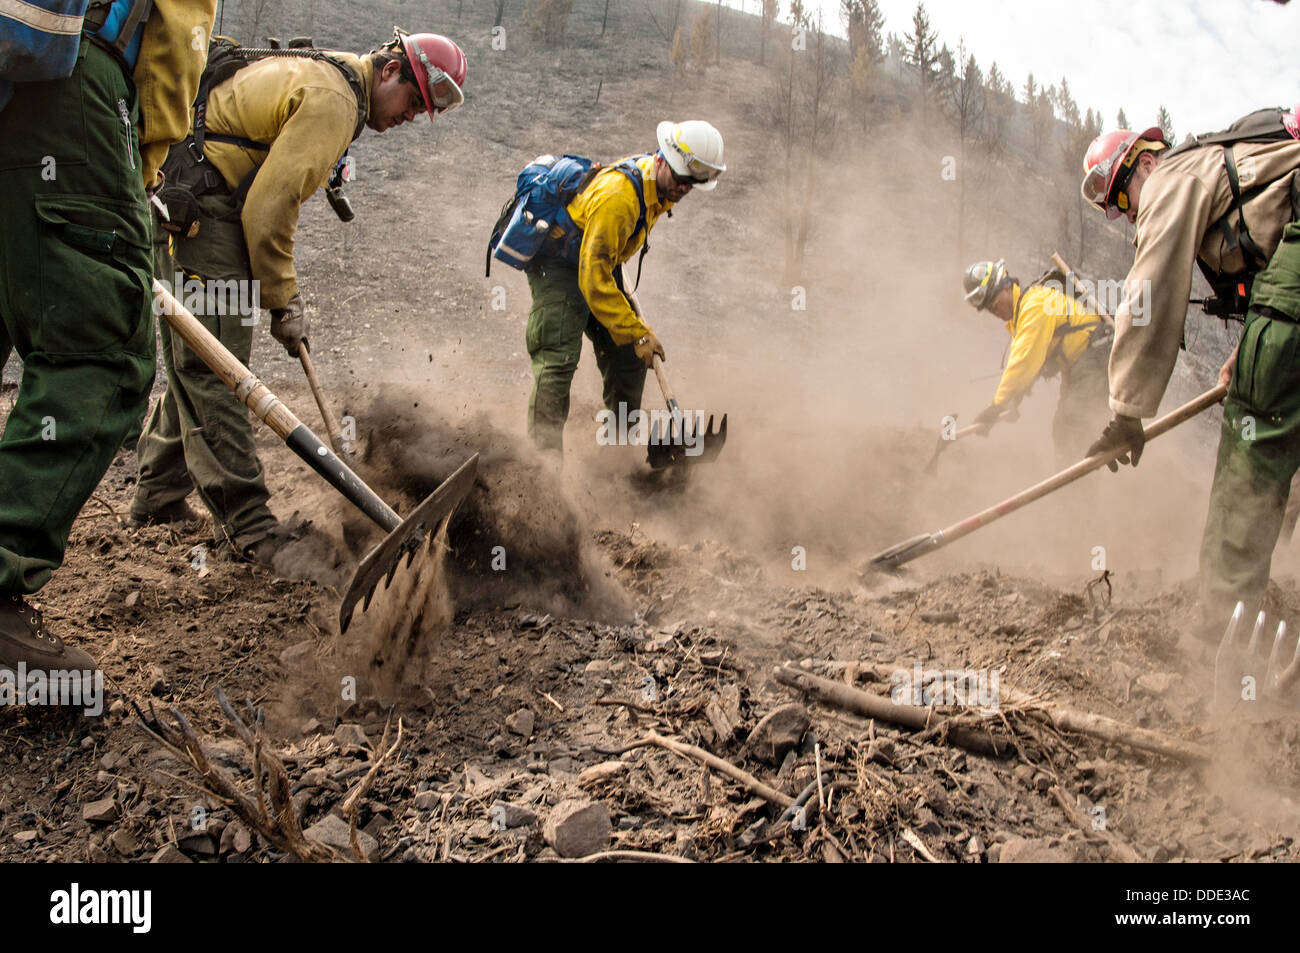 Southern Plains and Comanche wildfire initial Attack Crews work to extinguish underground smoldering fire in roots or buried tree limbs using hand tools at the Beaver Creek Fire August 21, 2013 west of Hailey, ID. Stock Photo